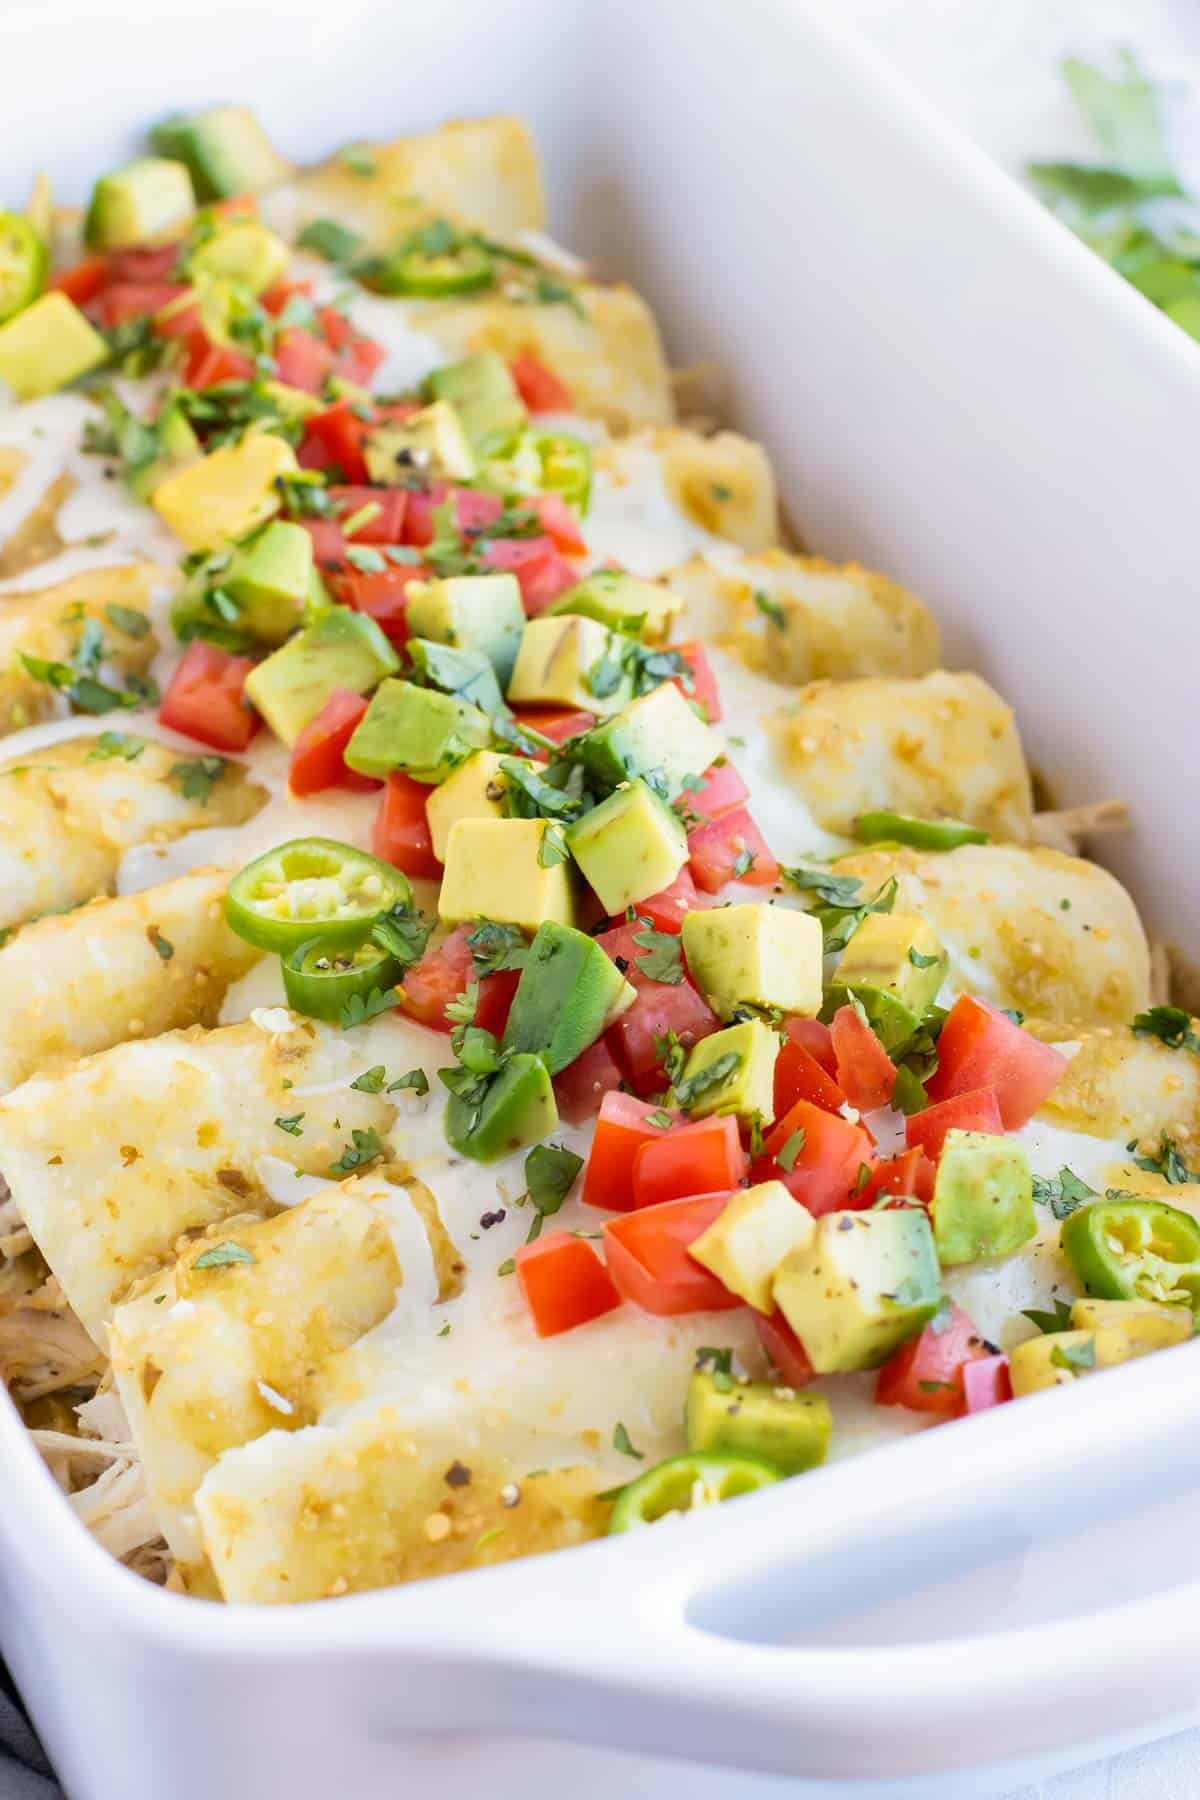 Chicken Enchiladas Verdes recipe in a white baking dish with avocado, tomatoes, and cilantro on top.